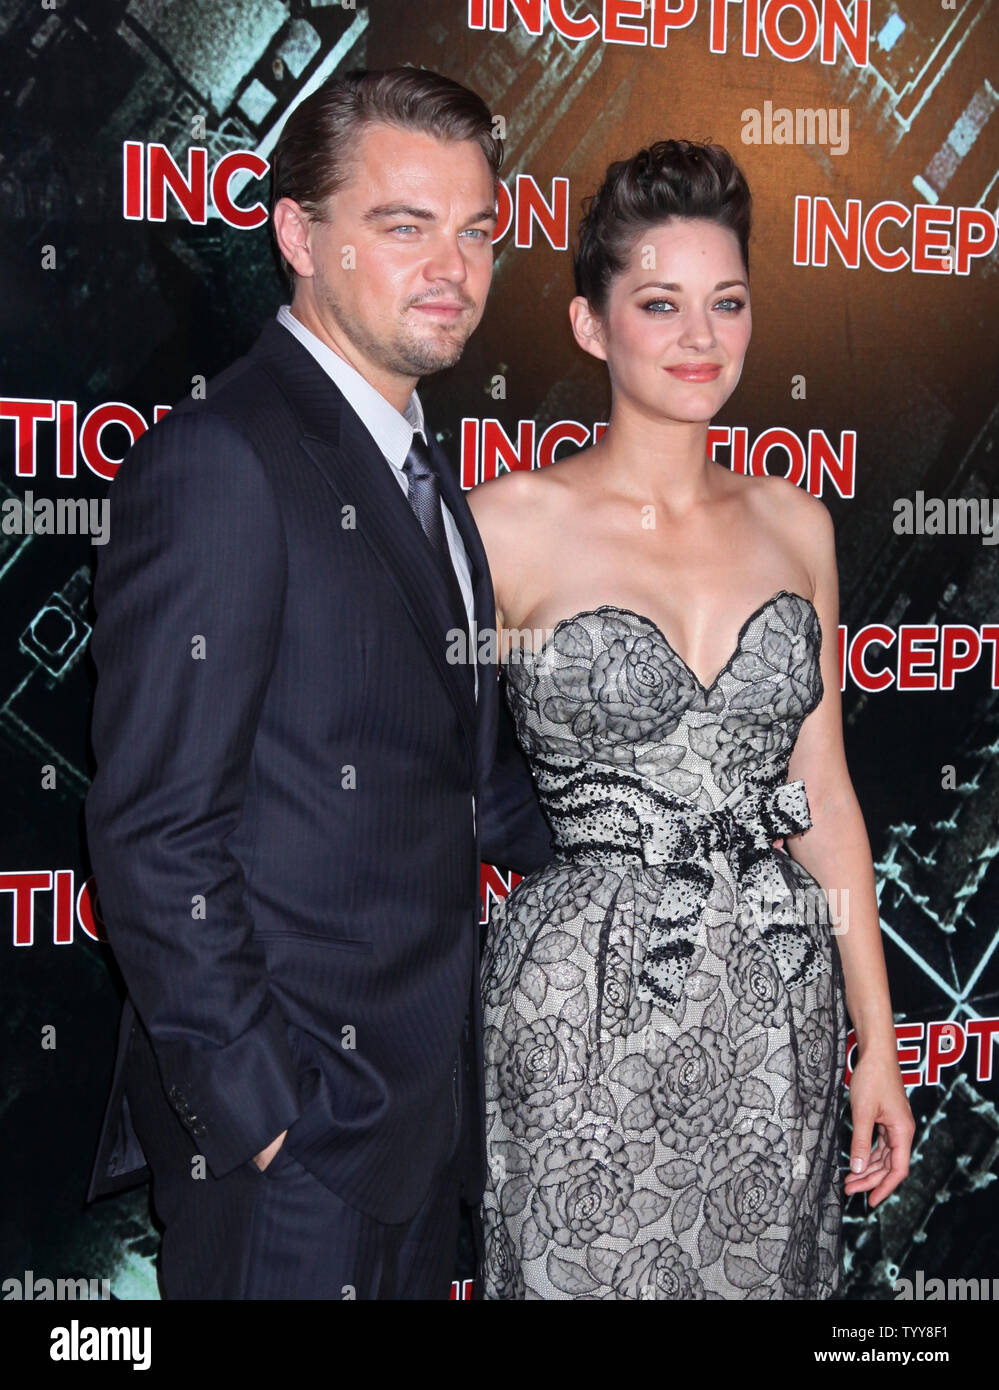 Leonardo Di Caprio (L) and Marion Cotillard arrive at the French premiere of the film 'Inception' in Paris on July 10, 2010.     UPI/David Silpa Stock Photo